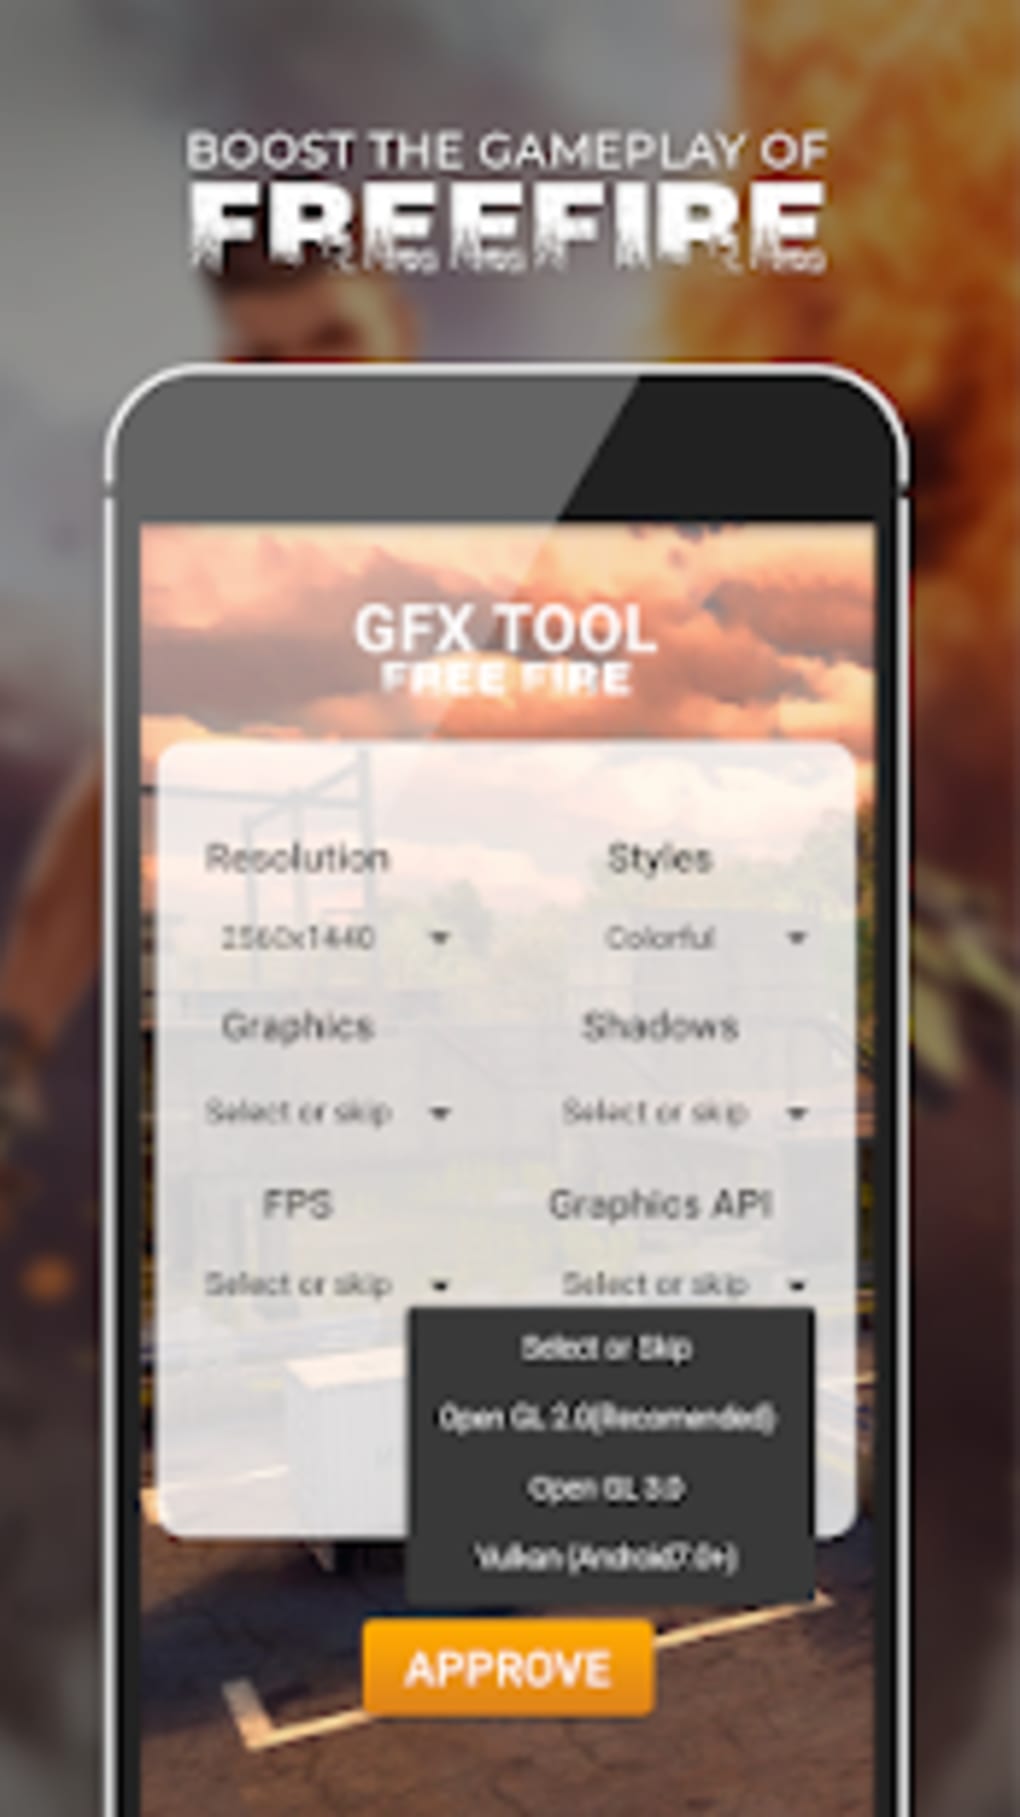 Gfx Tool Free Fire Booster Apk For Android Download